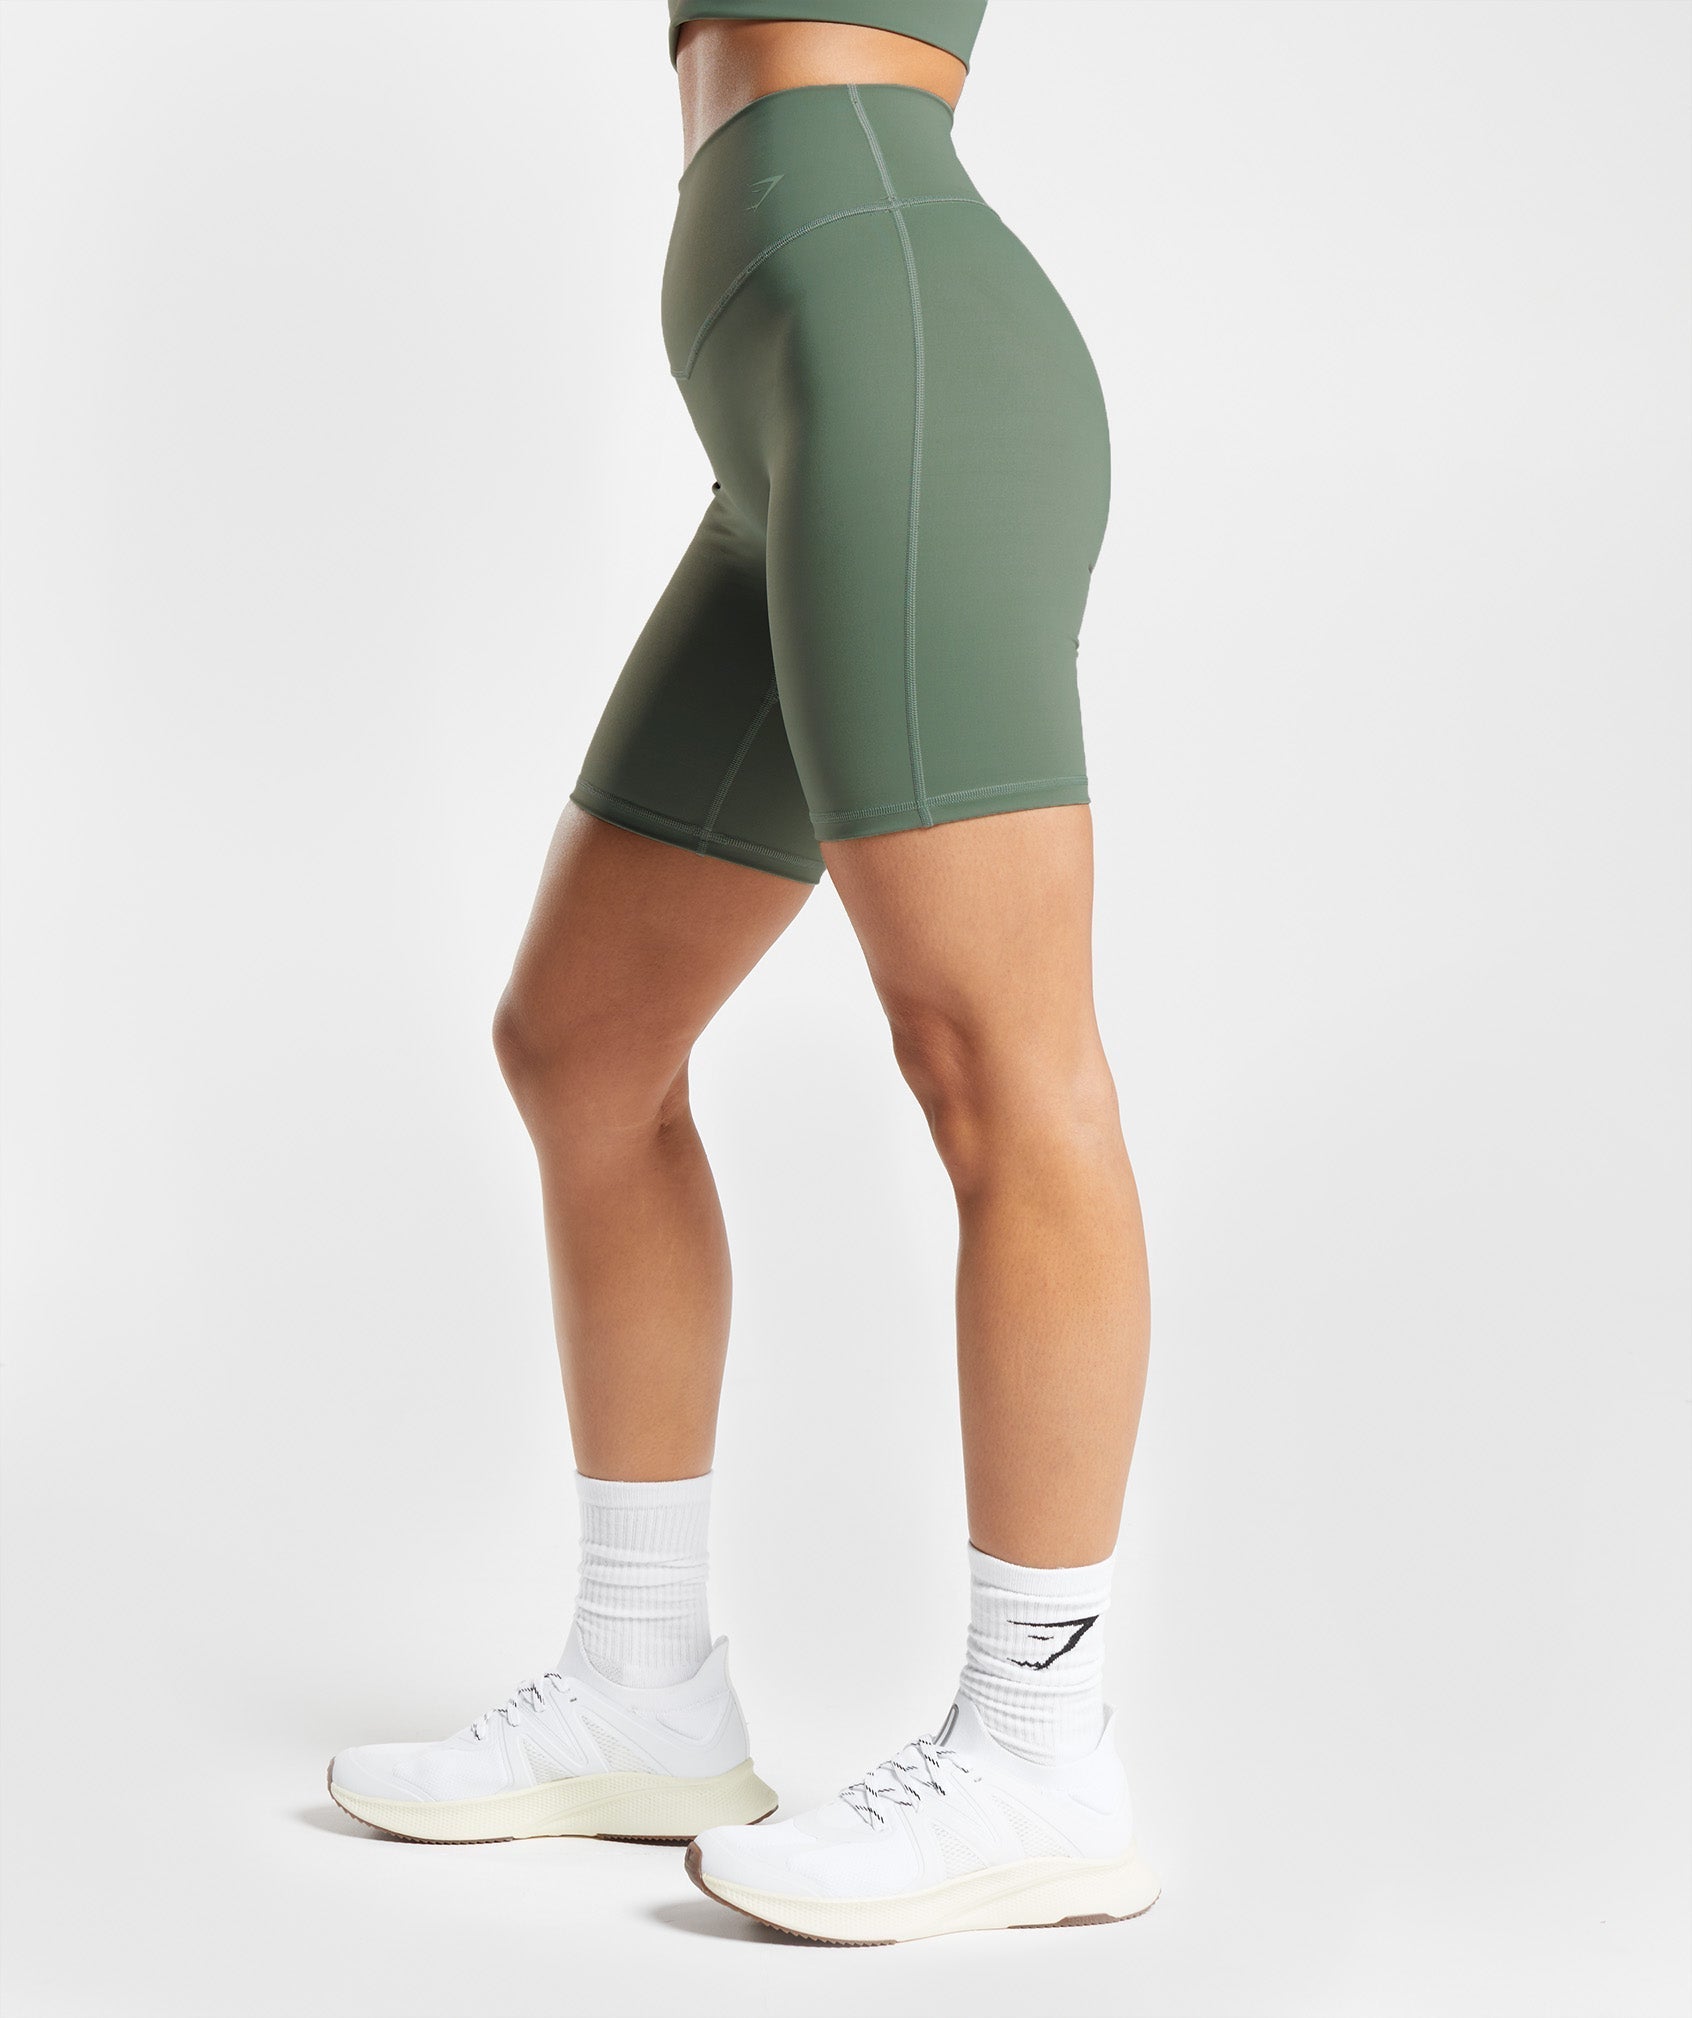 Elevate Cycling Shorts in Willow Green - view 5